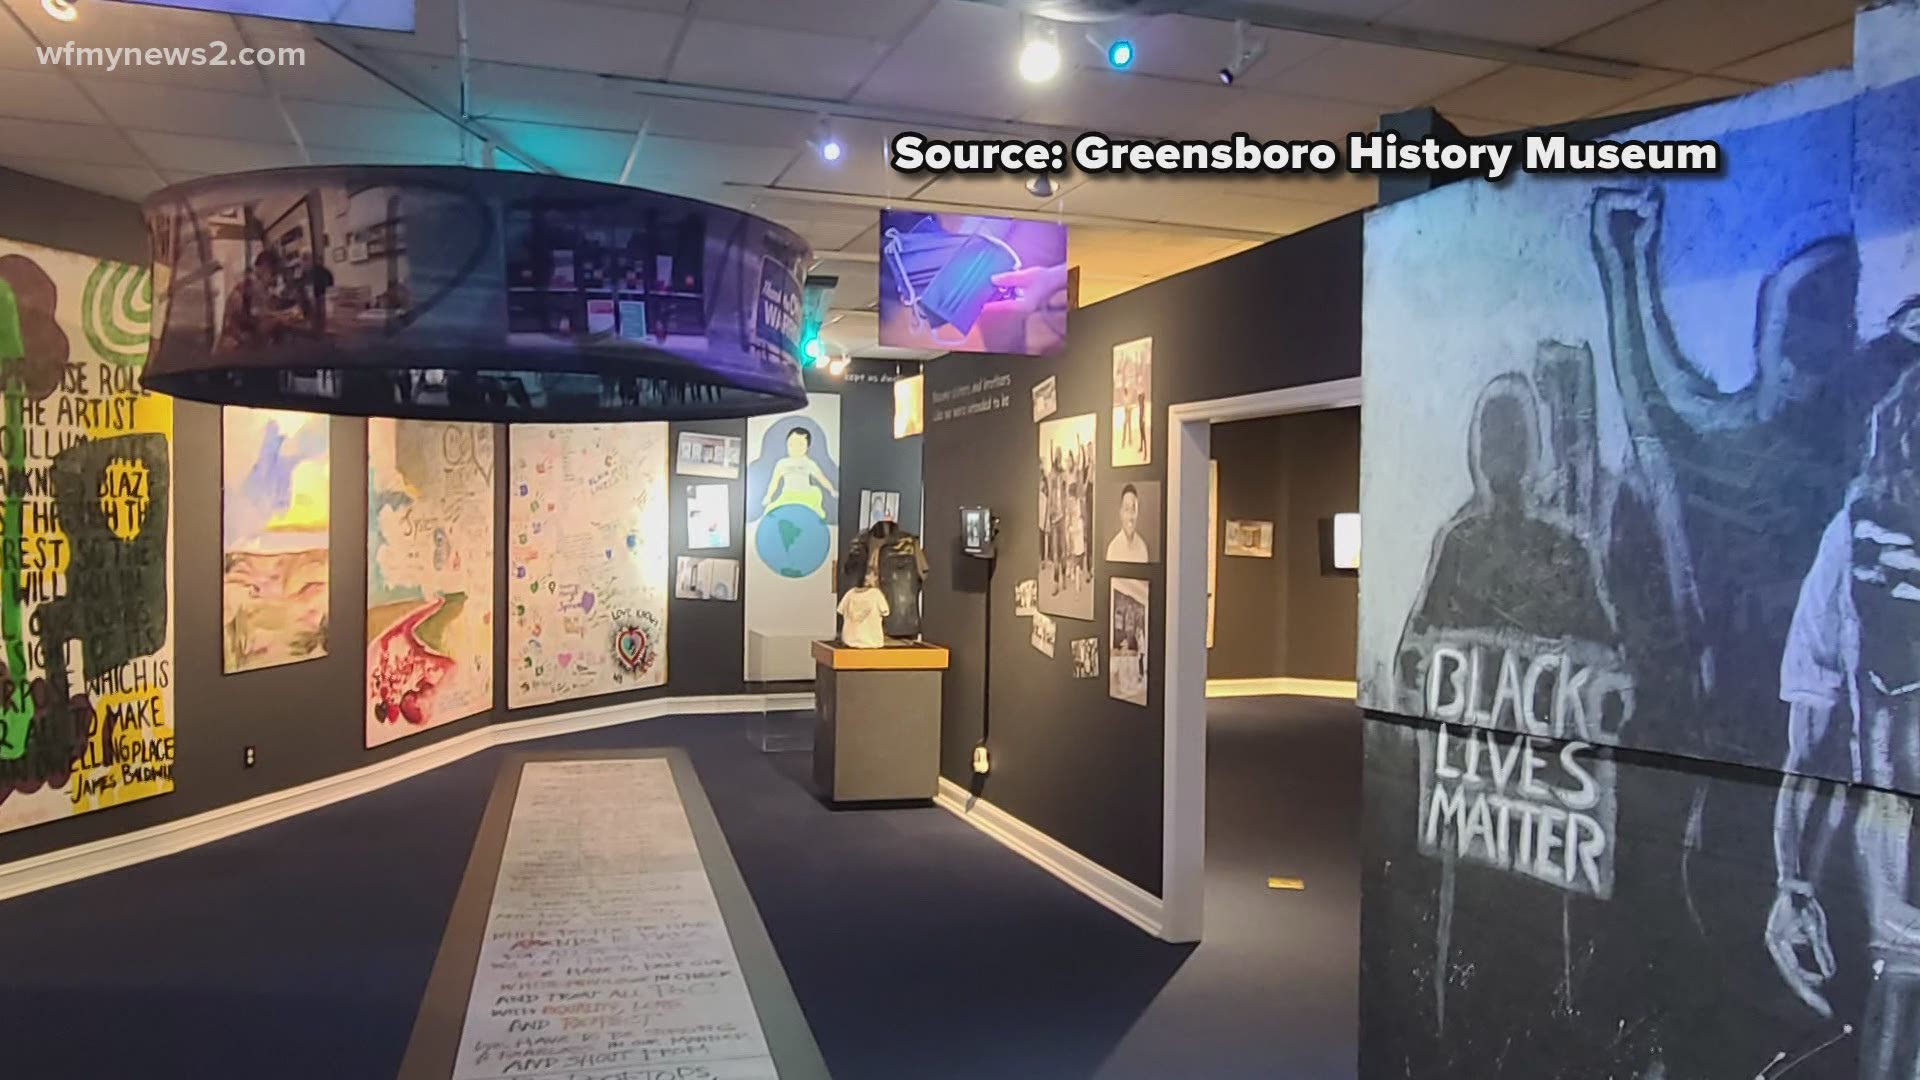 The Greensboro History Museum opens a new exhibit focused on the major life changes 2020 created.